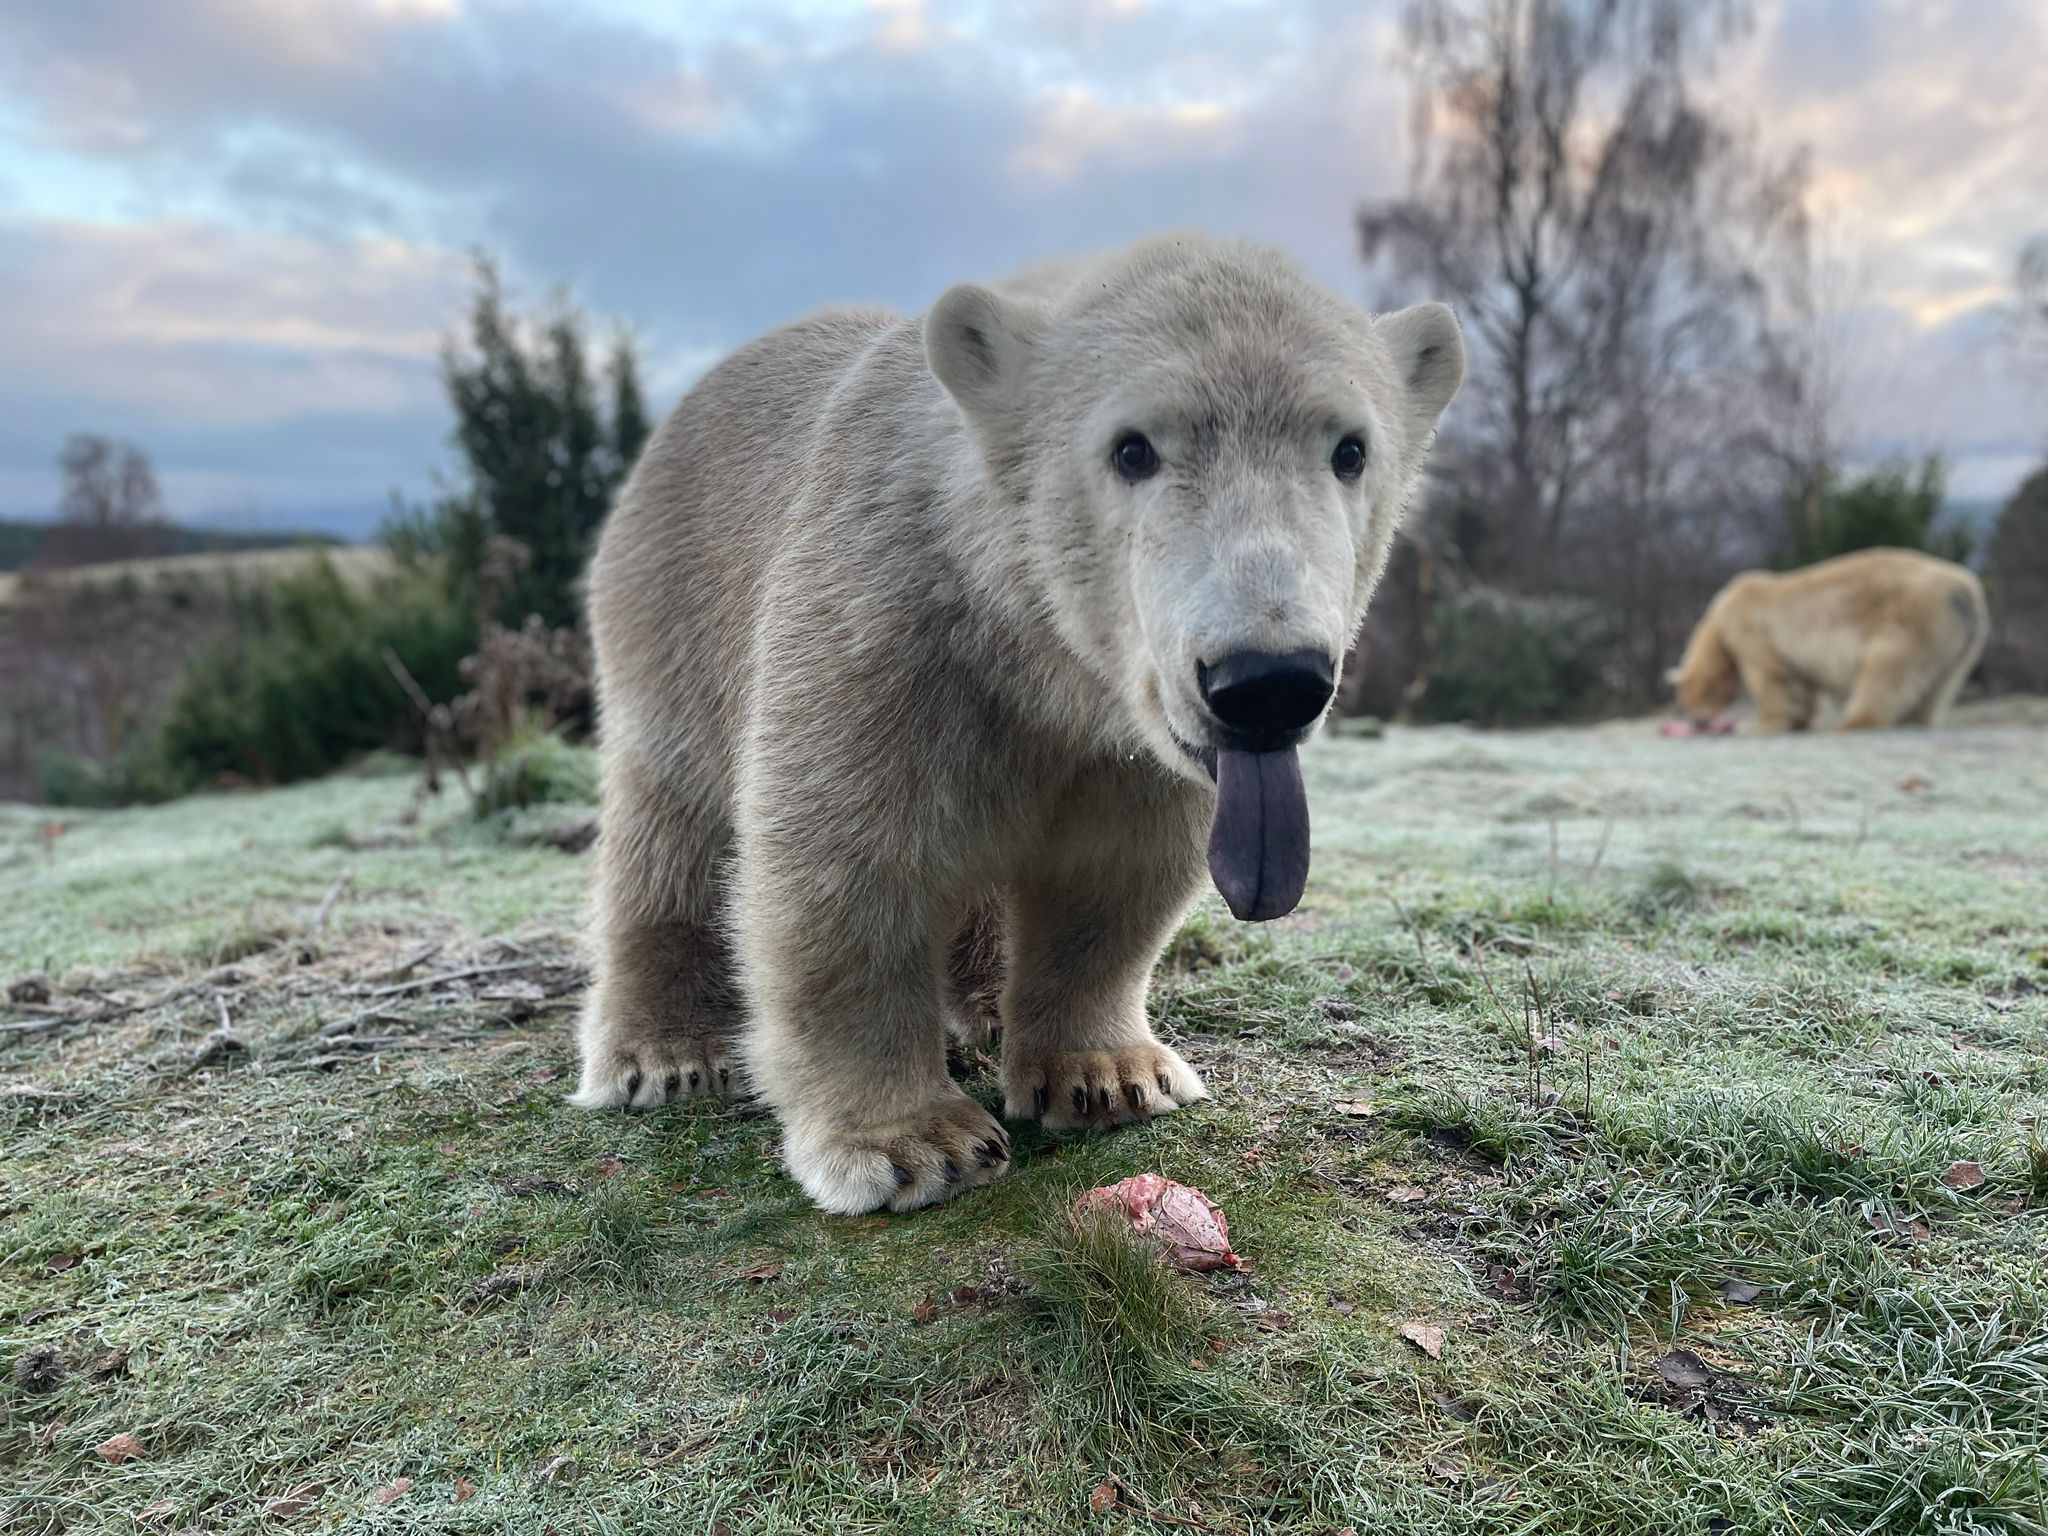 Polar bear cub Brodie looking at camera with tongue out [eye contact] IMAGE: Amy Middleton 2022